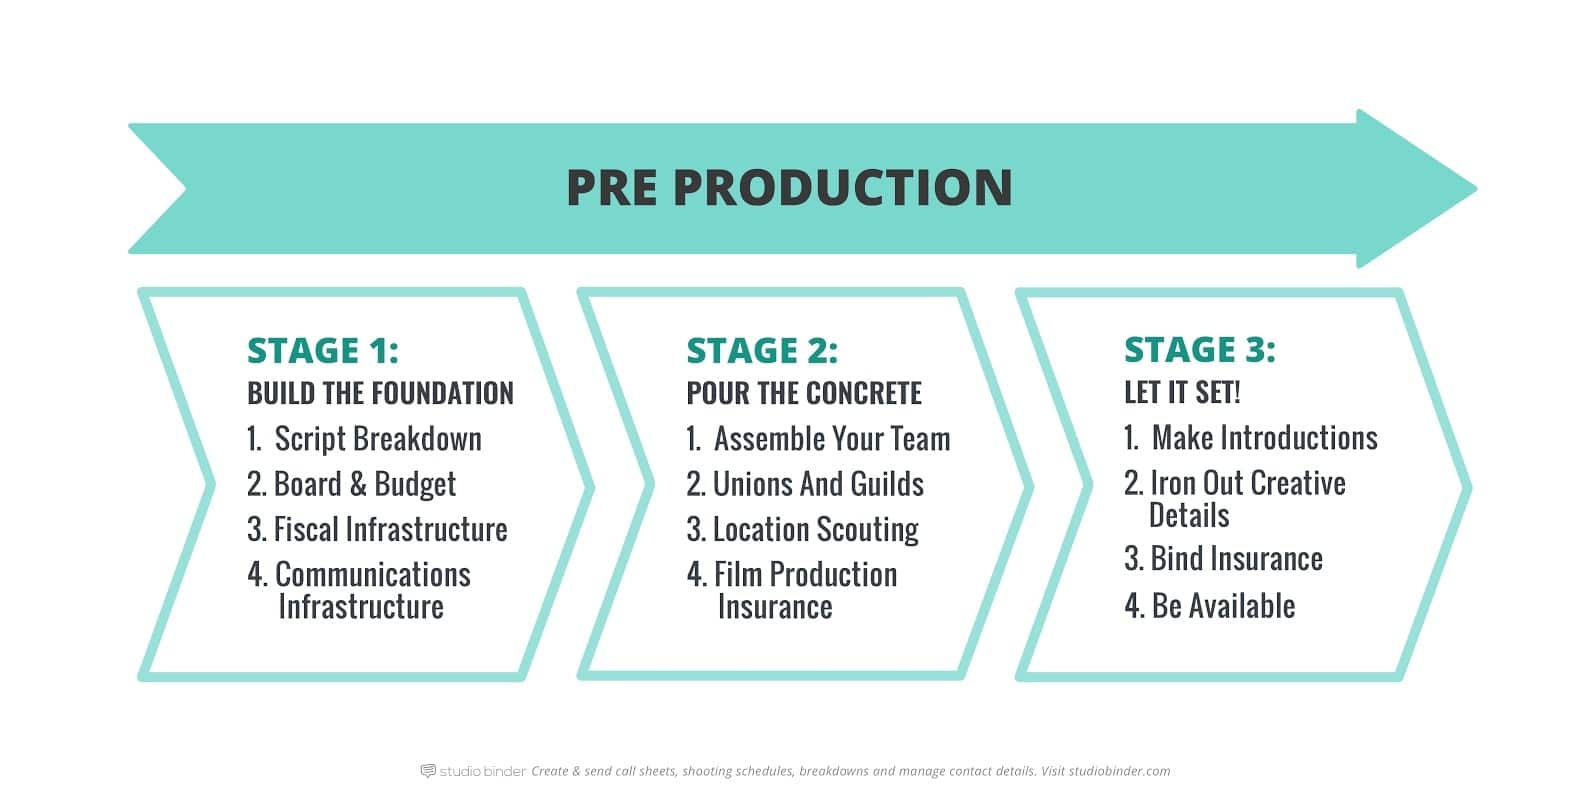 movies in pre production 2015